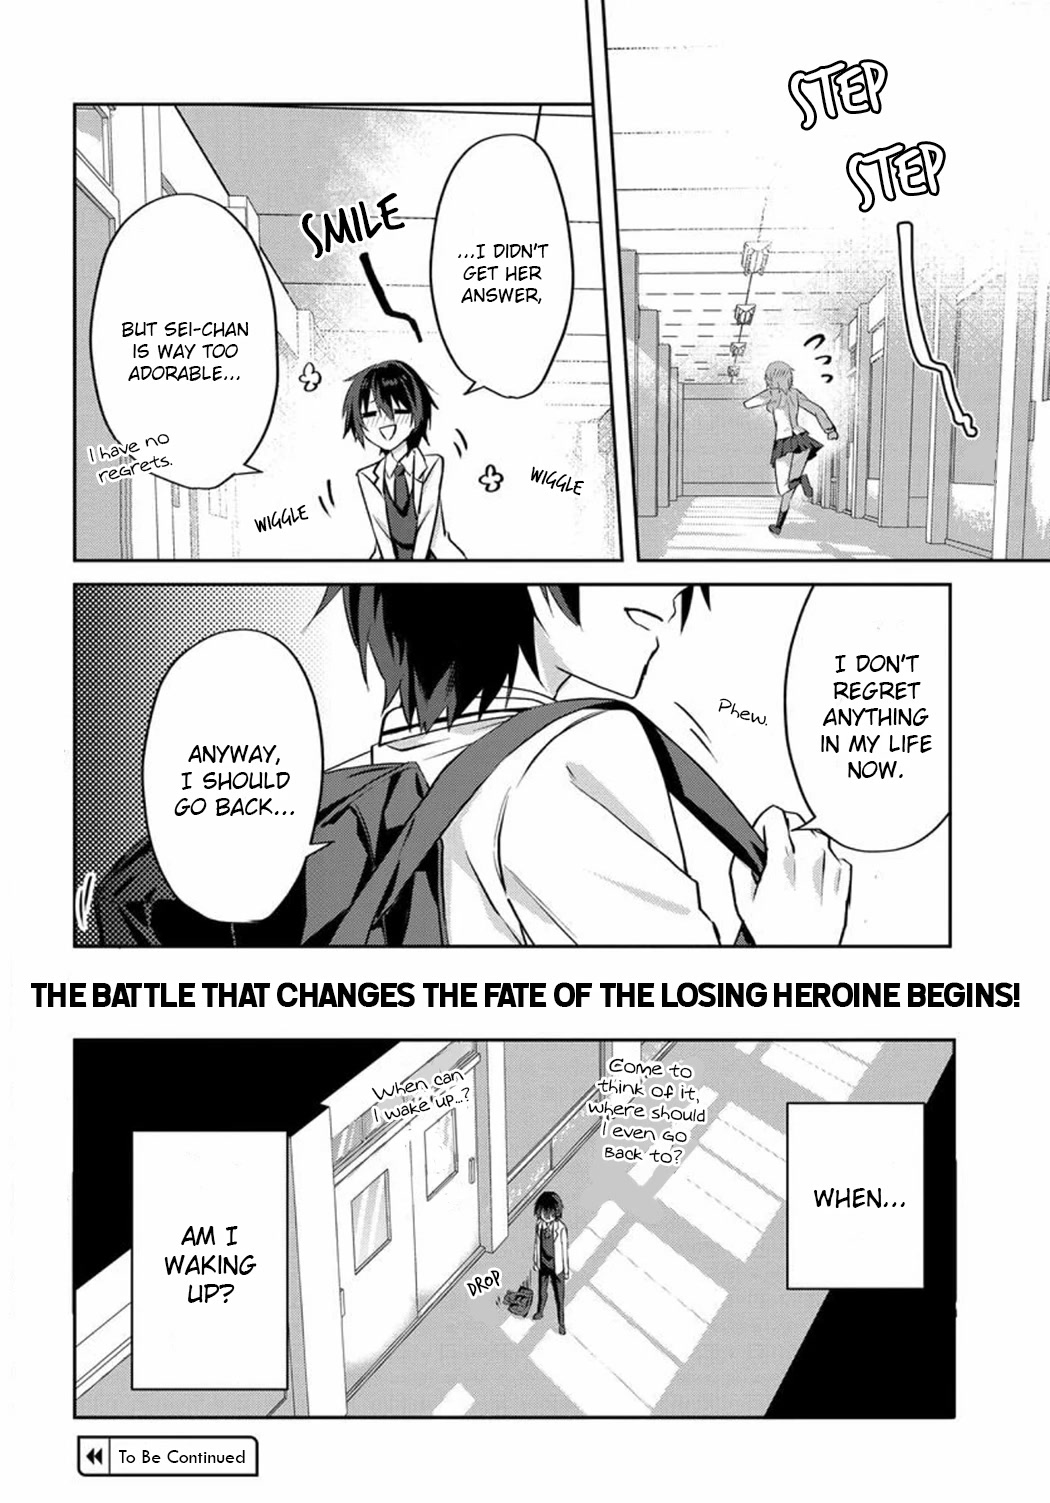 Since I’Ve Entered The World Of Romantic Comedy Manga, I’Ll Do My Best To Make The Losing Heroine Happy Chapter 1 #30